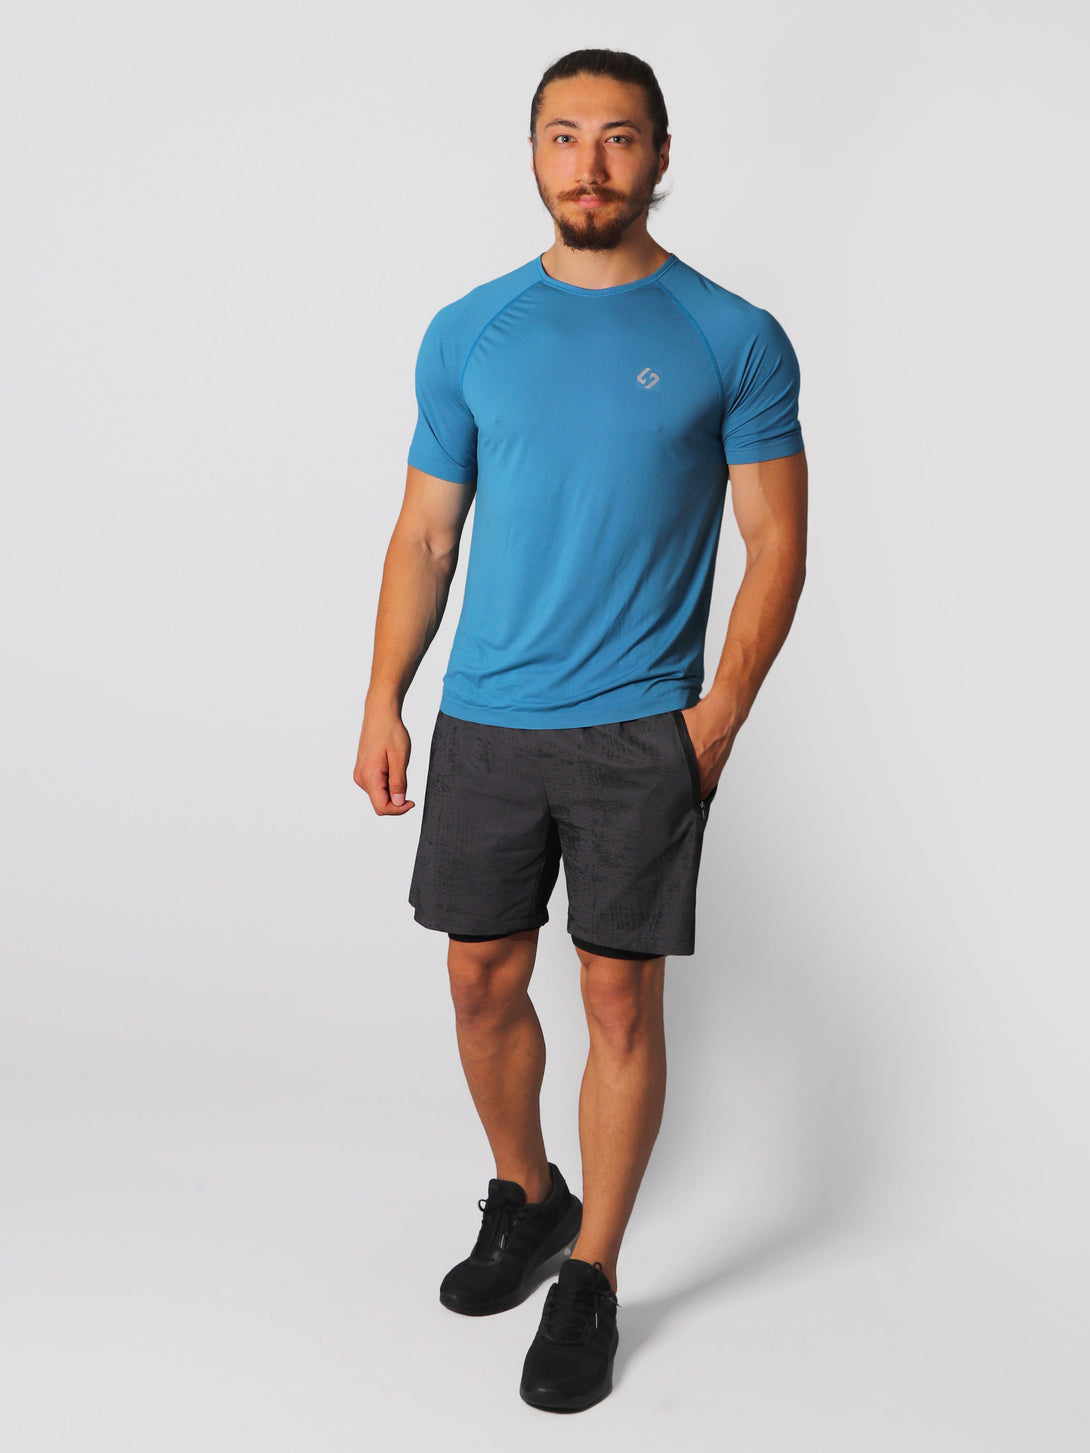 A Man Wearing Saxony Blue Color Seamless The Motion T-Shirt